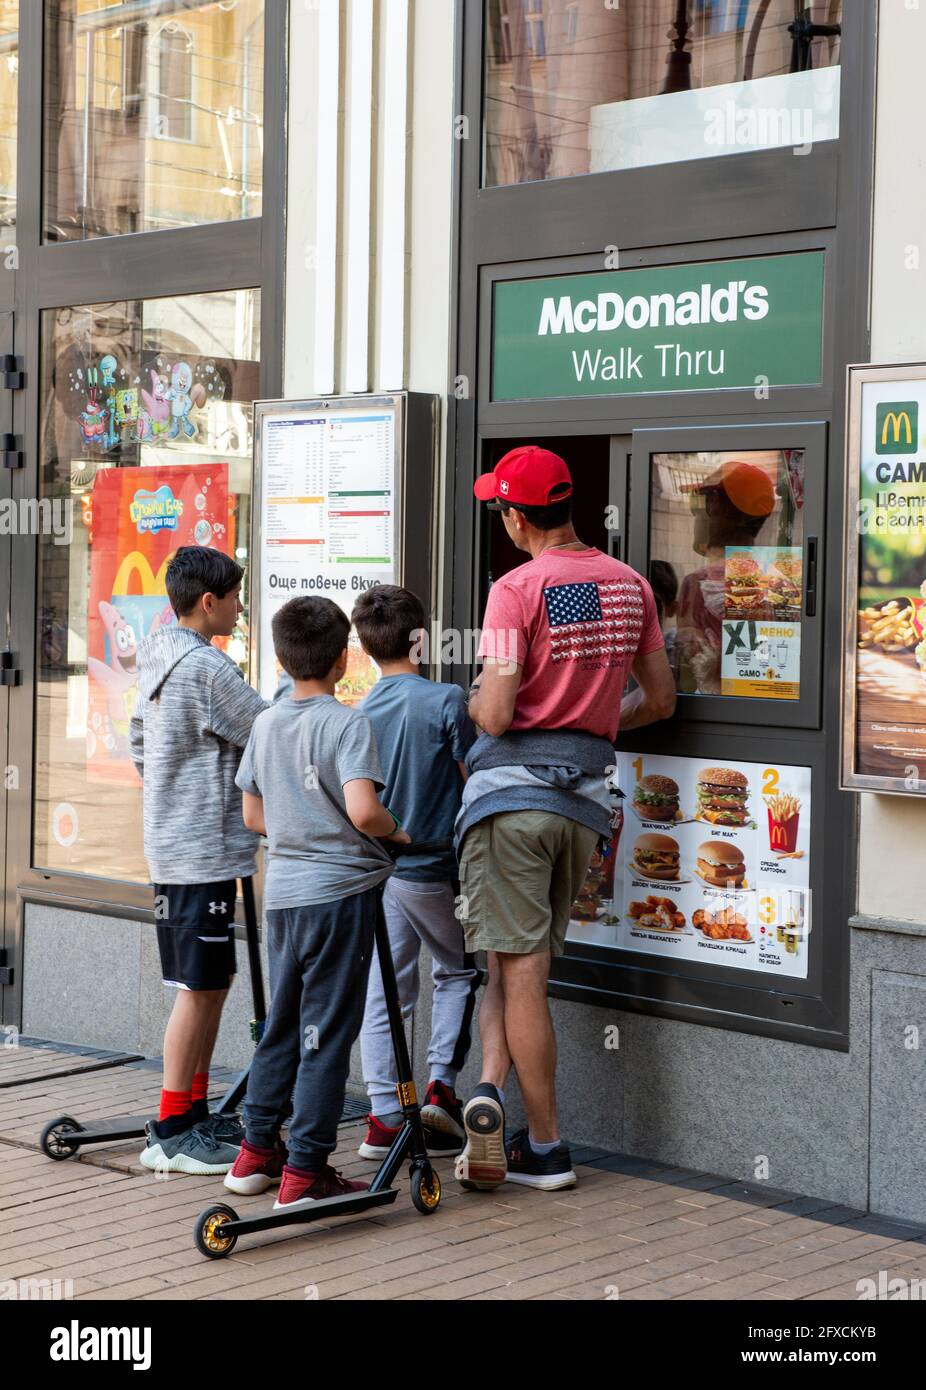 Man and boys with scooters at McDonald's Walk Thru collection point window in Sofia, Bulgaria Stock Photo